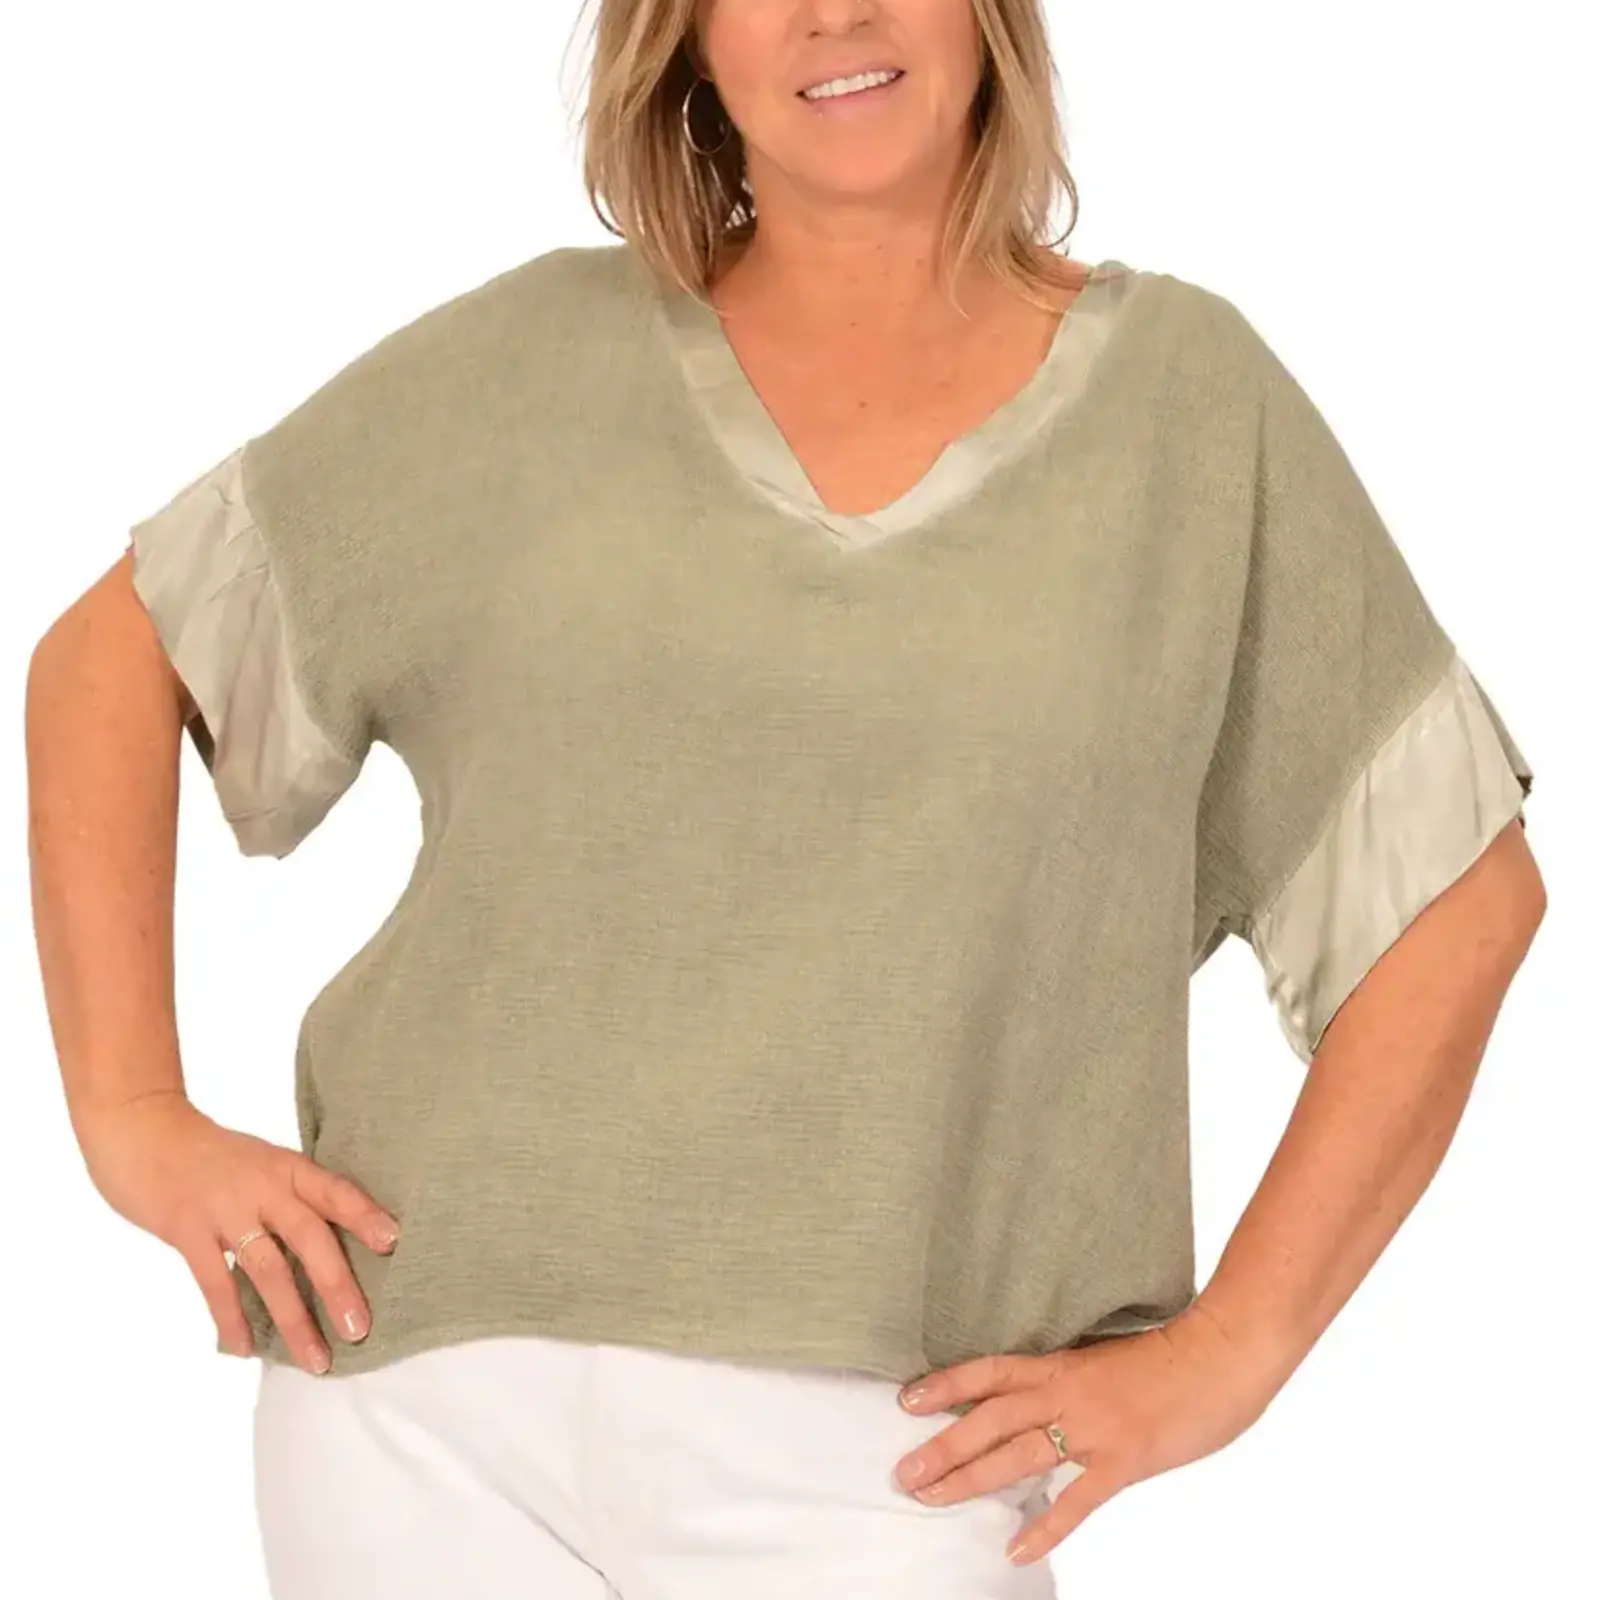 Catherine Lillywhite's Green  Satin Edge Tee  Made in Italy  ITEL809903GR loading=